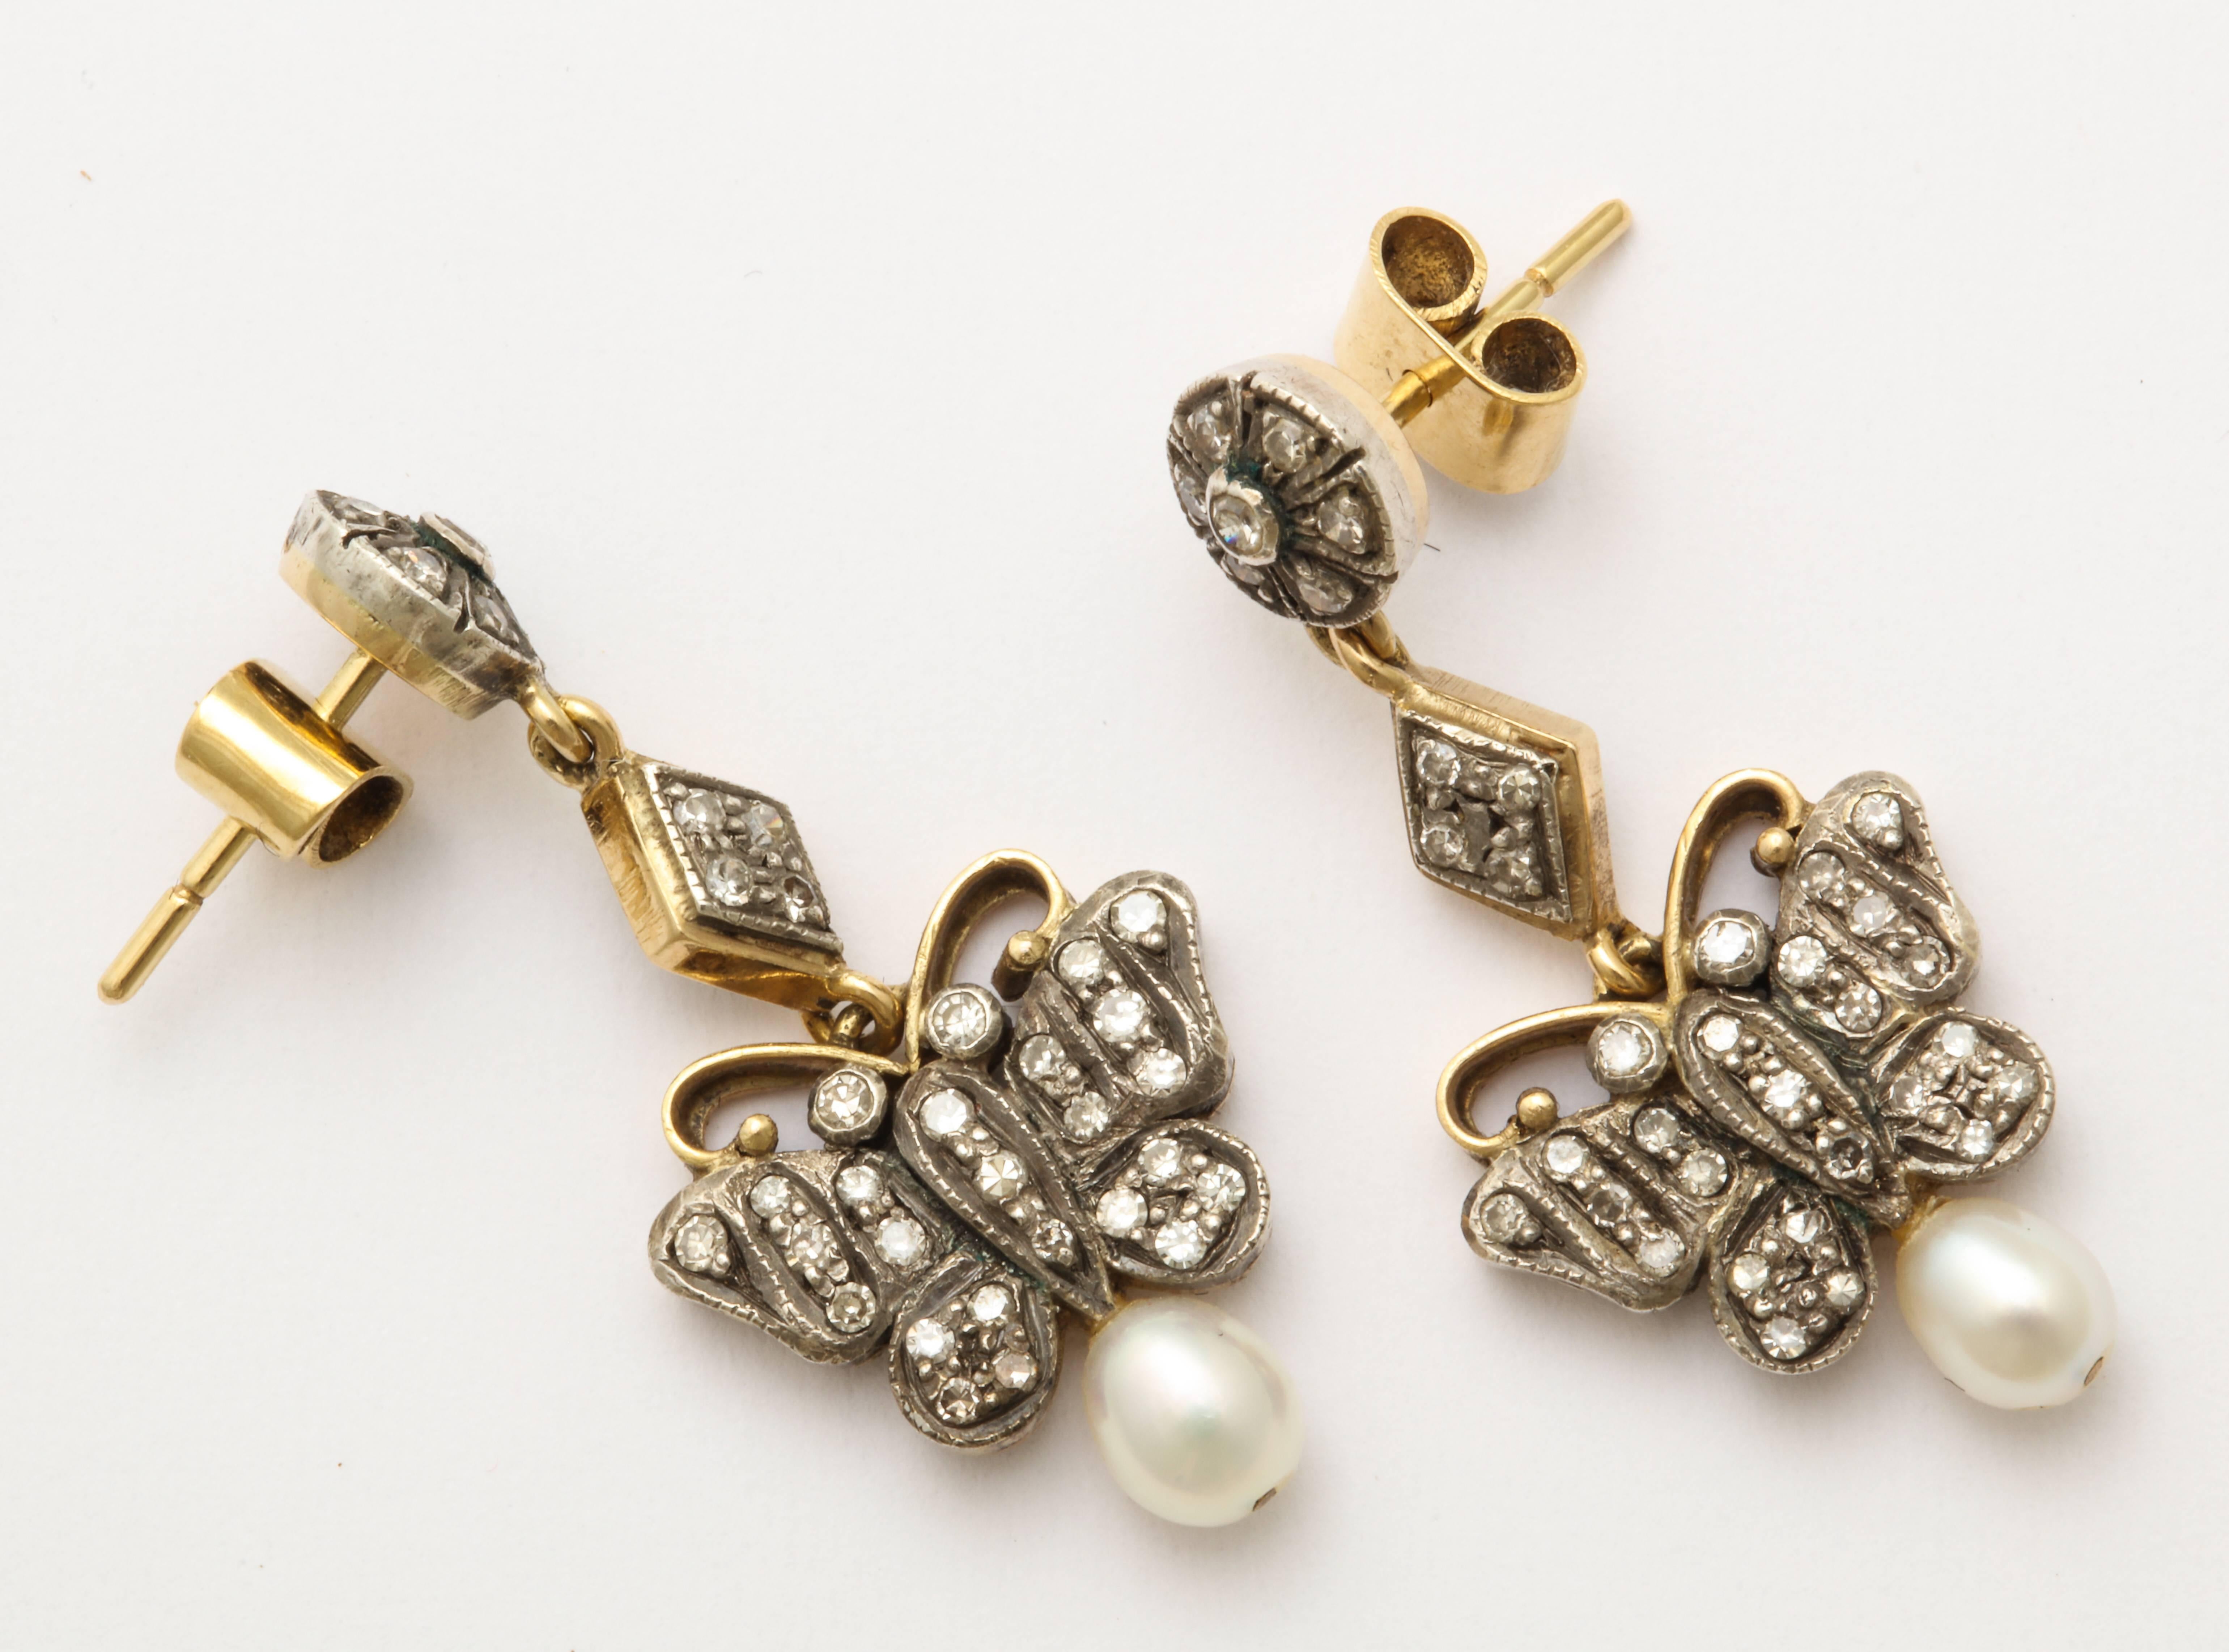 Edwardian Antique Gold and Silver Diamond and Pearl Butterfly Drop Earrings